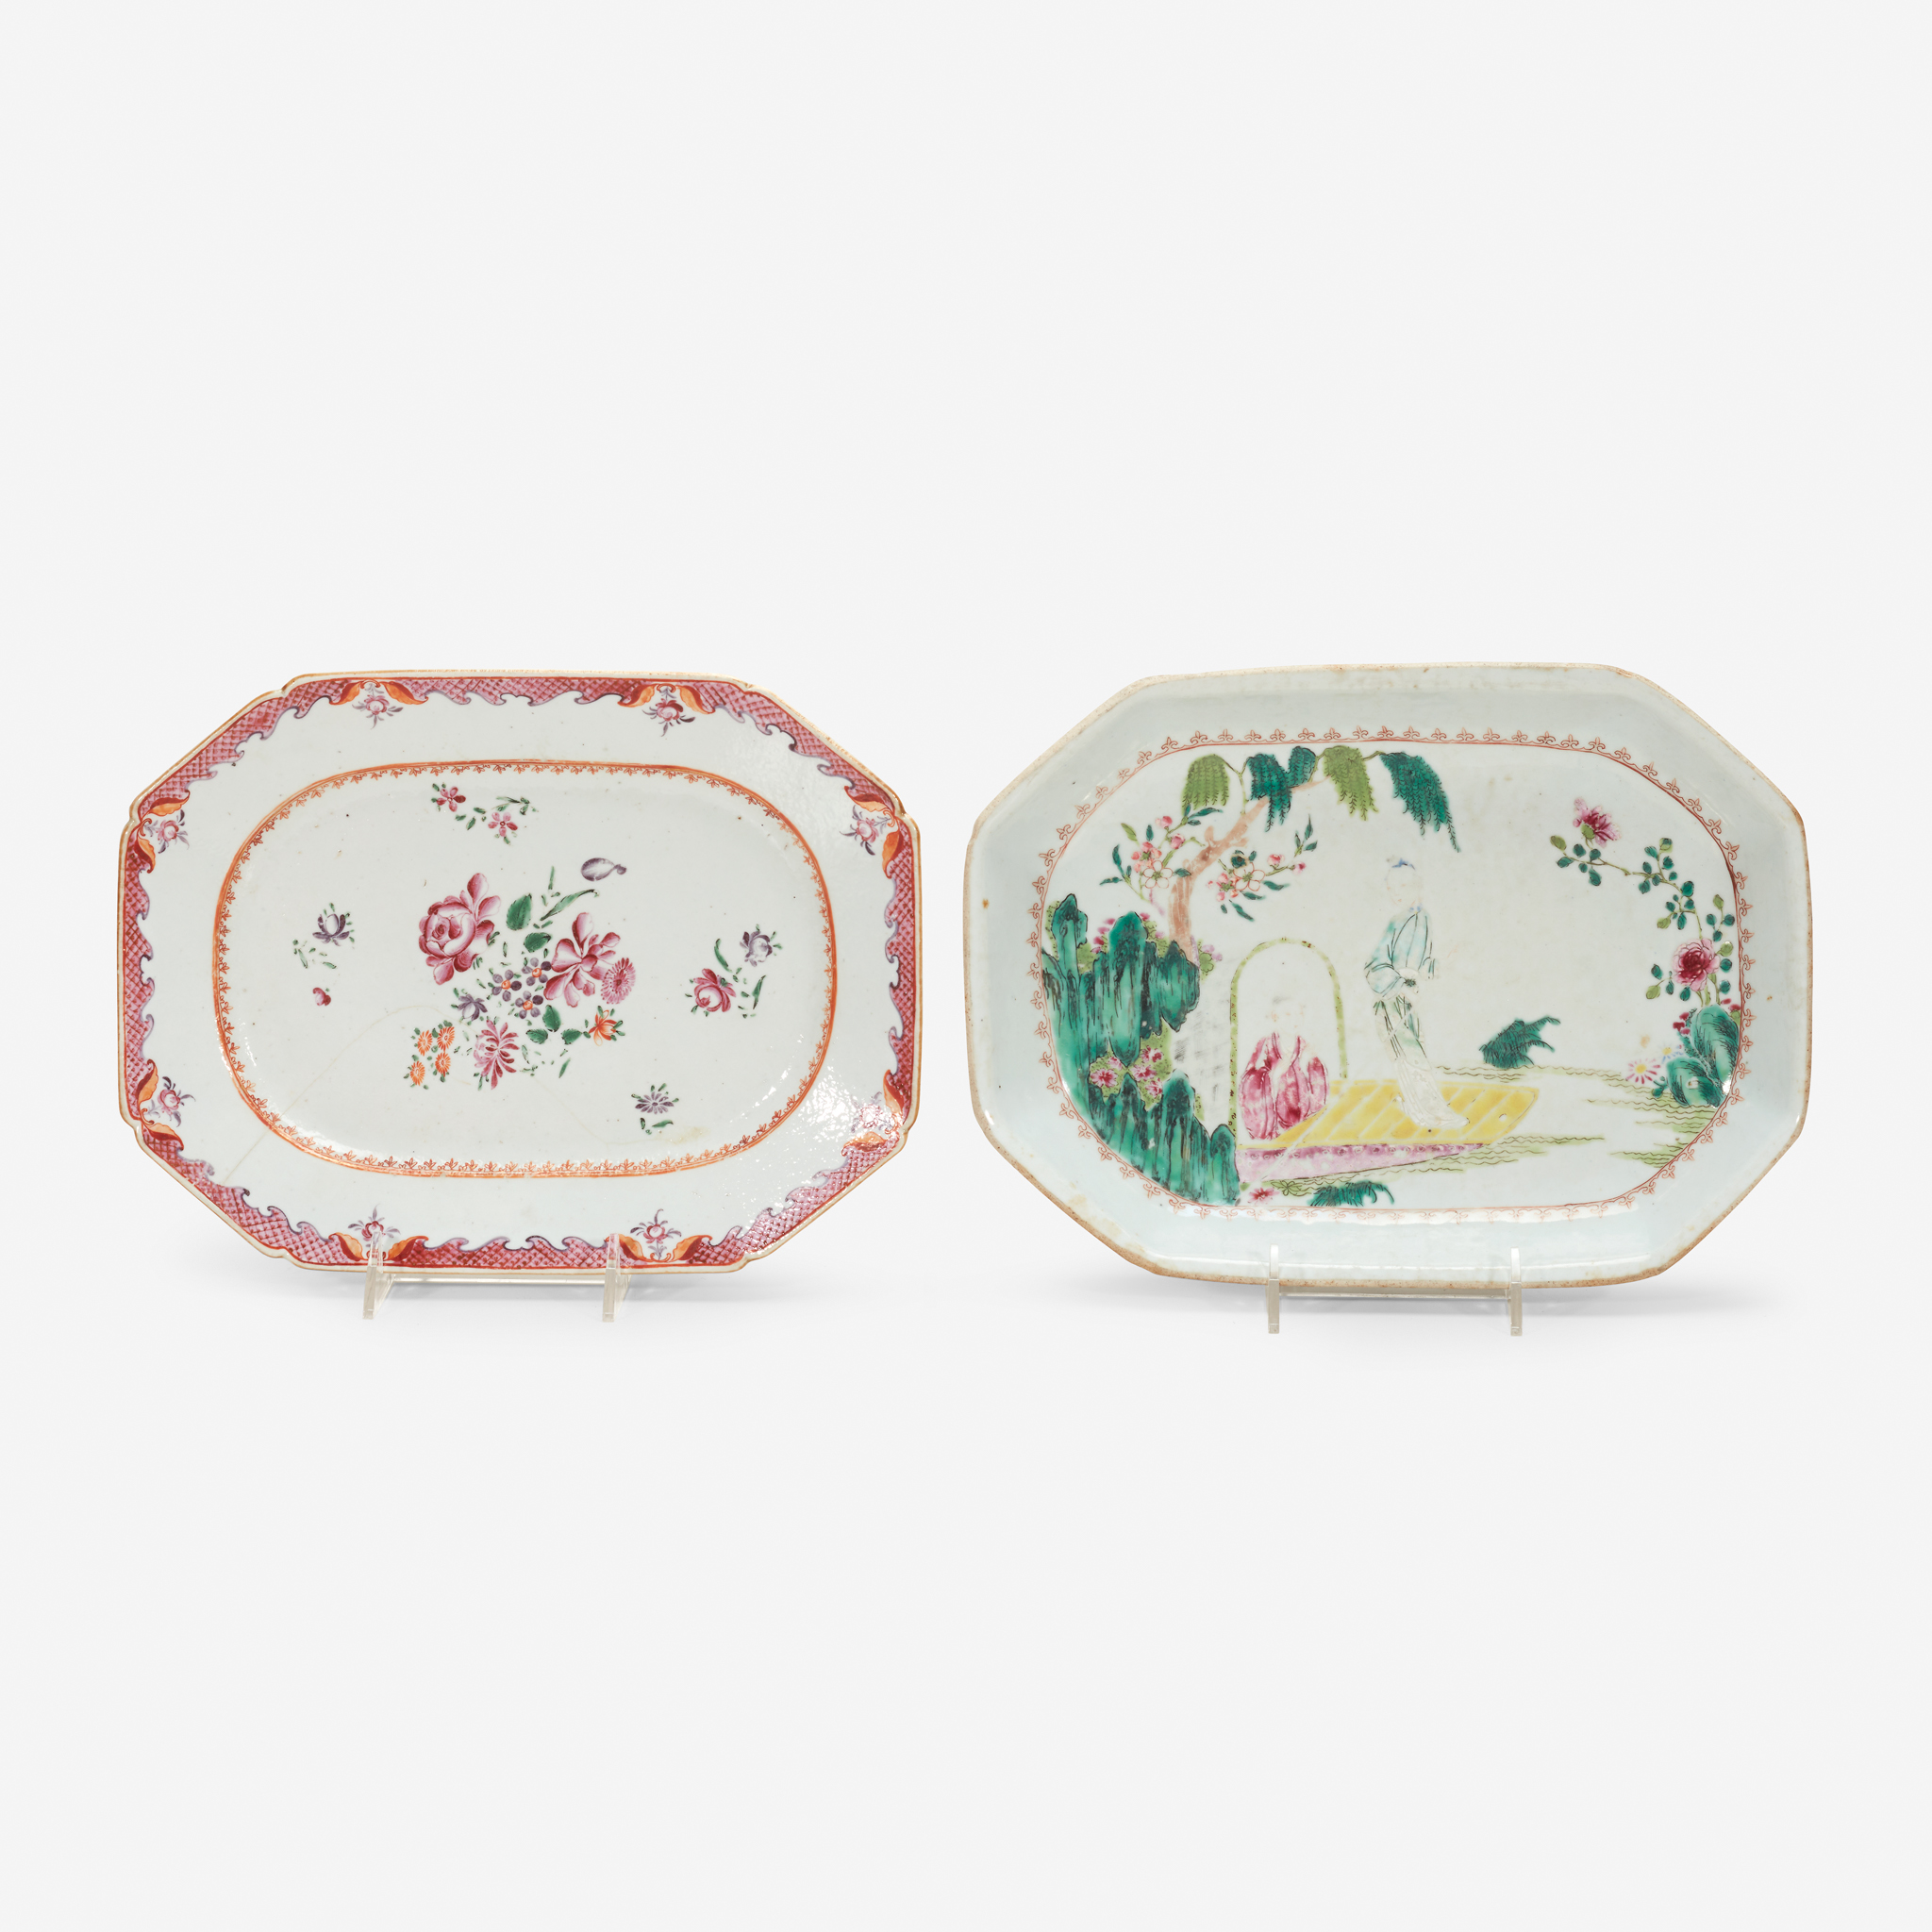 Two Chinese export porcelain famille rose octagonal serving dishes, 18th century